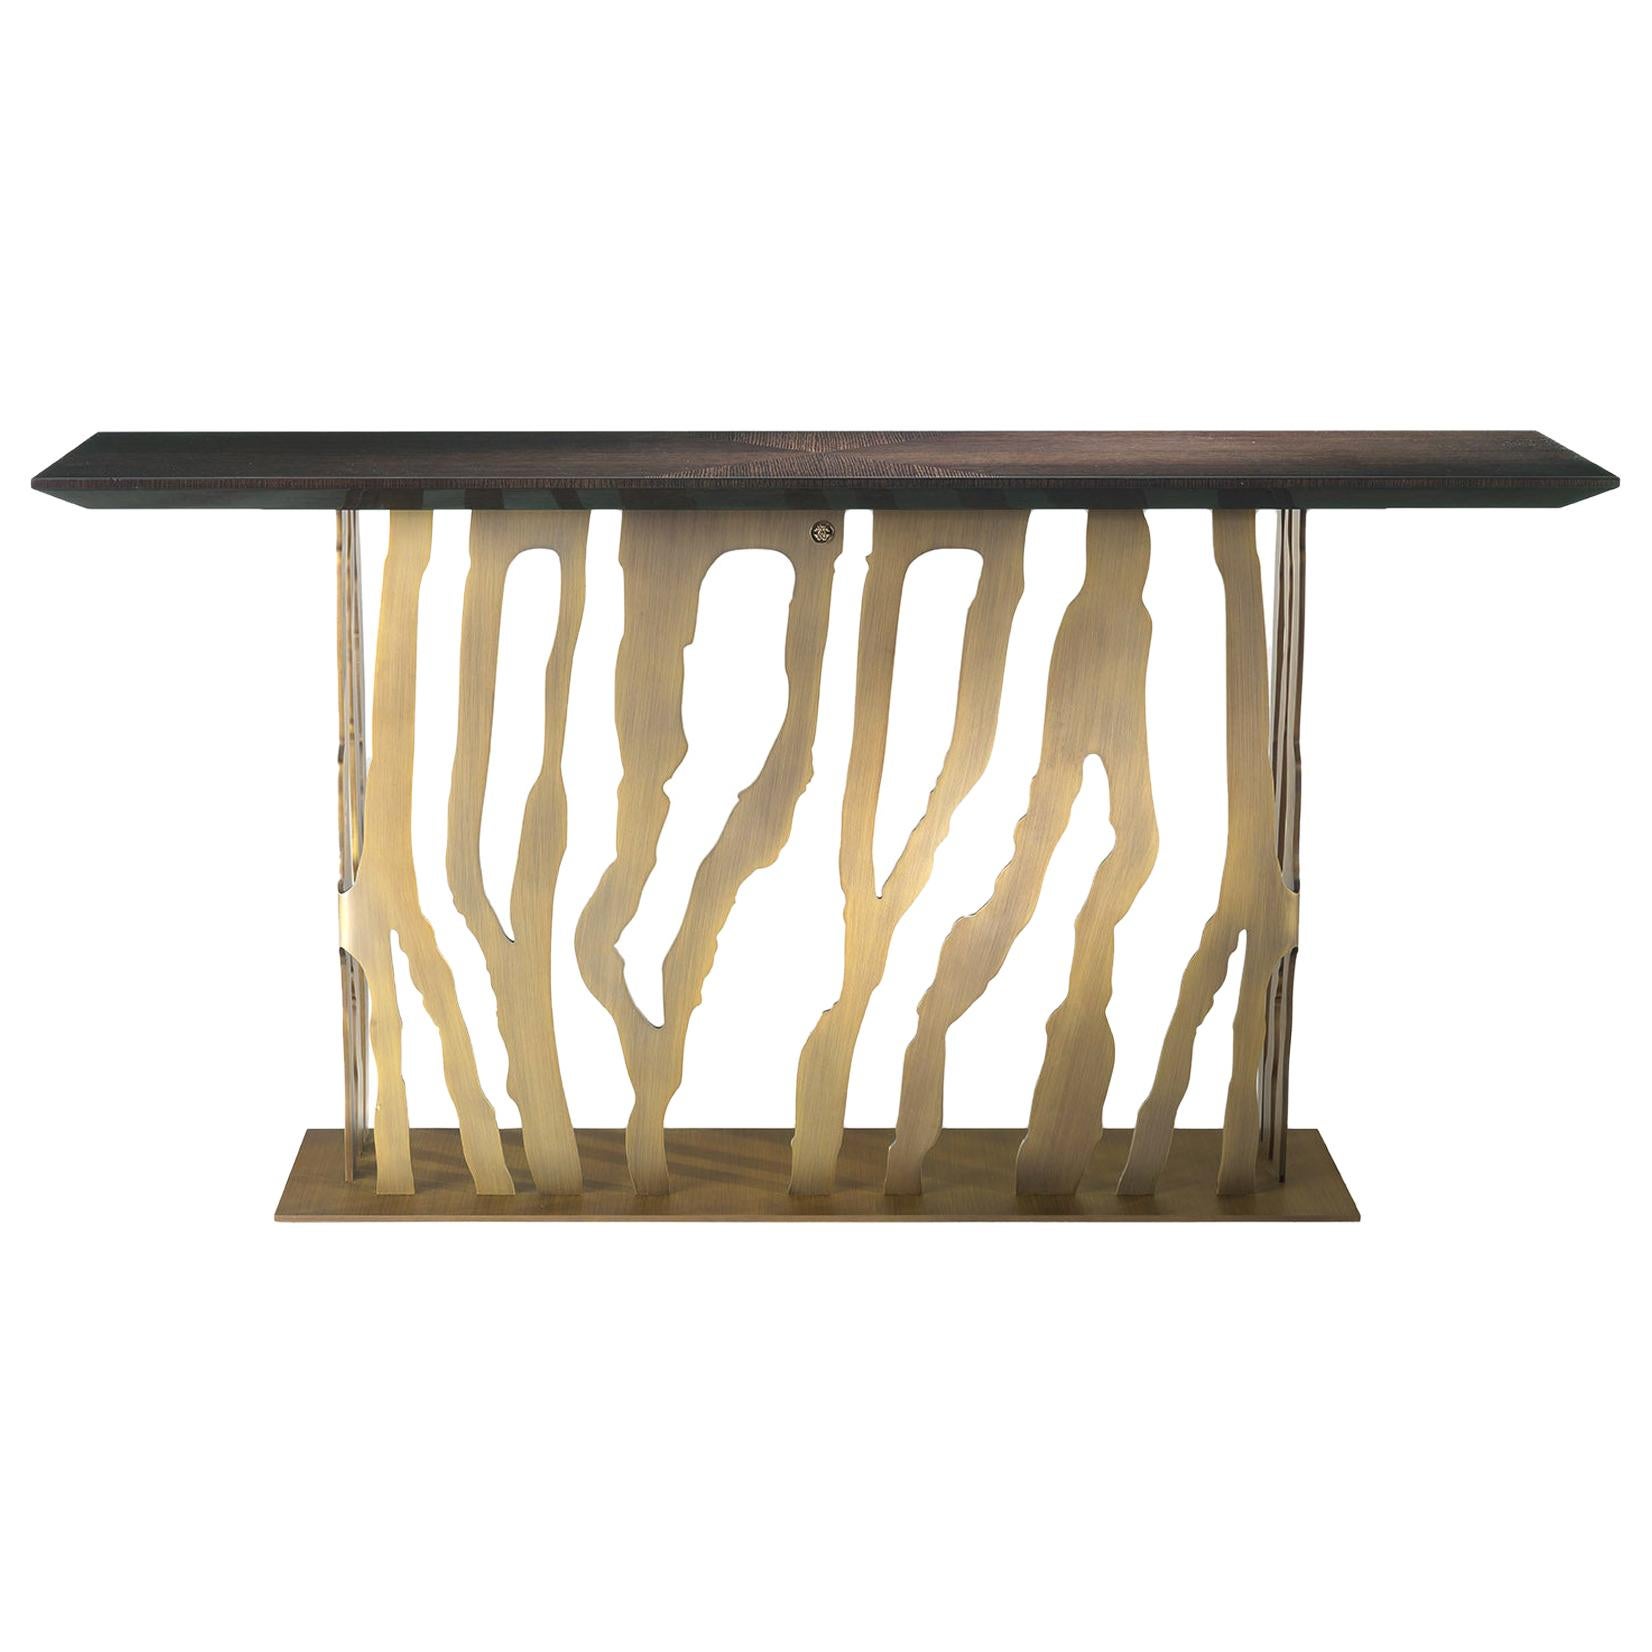 21st Century B-52 Console in Wood and Metal by Roberto Cavalli Home Interiors